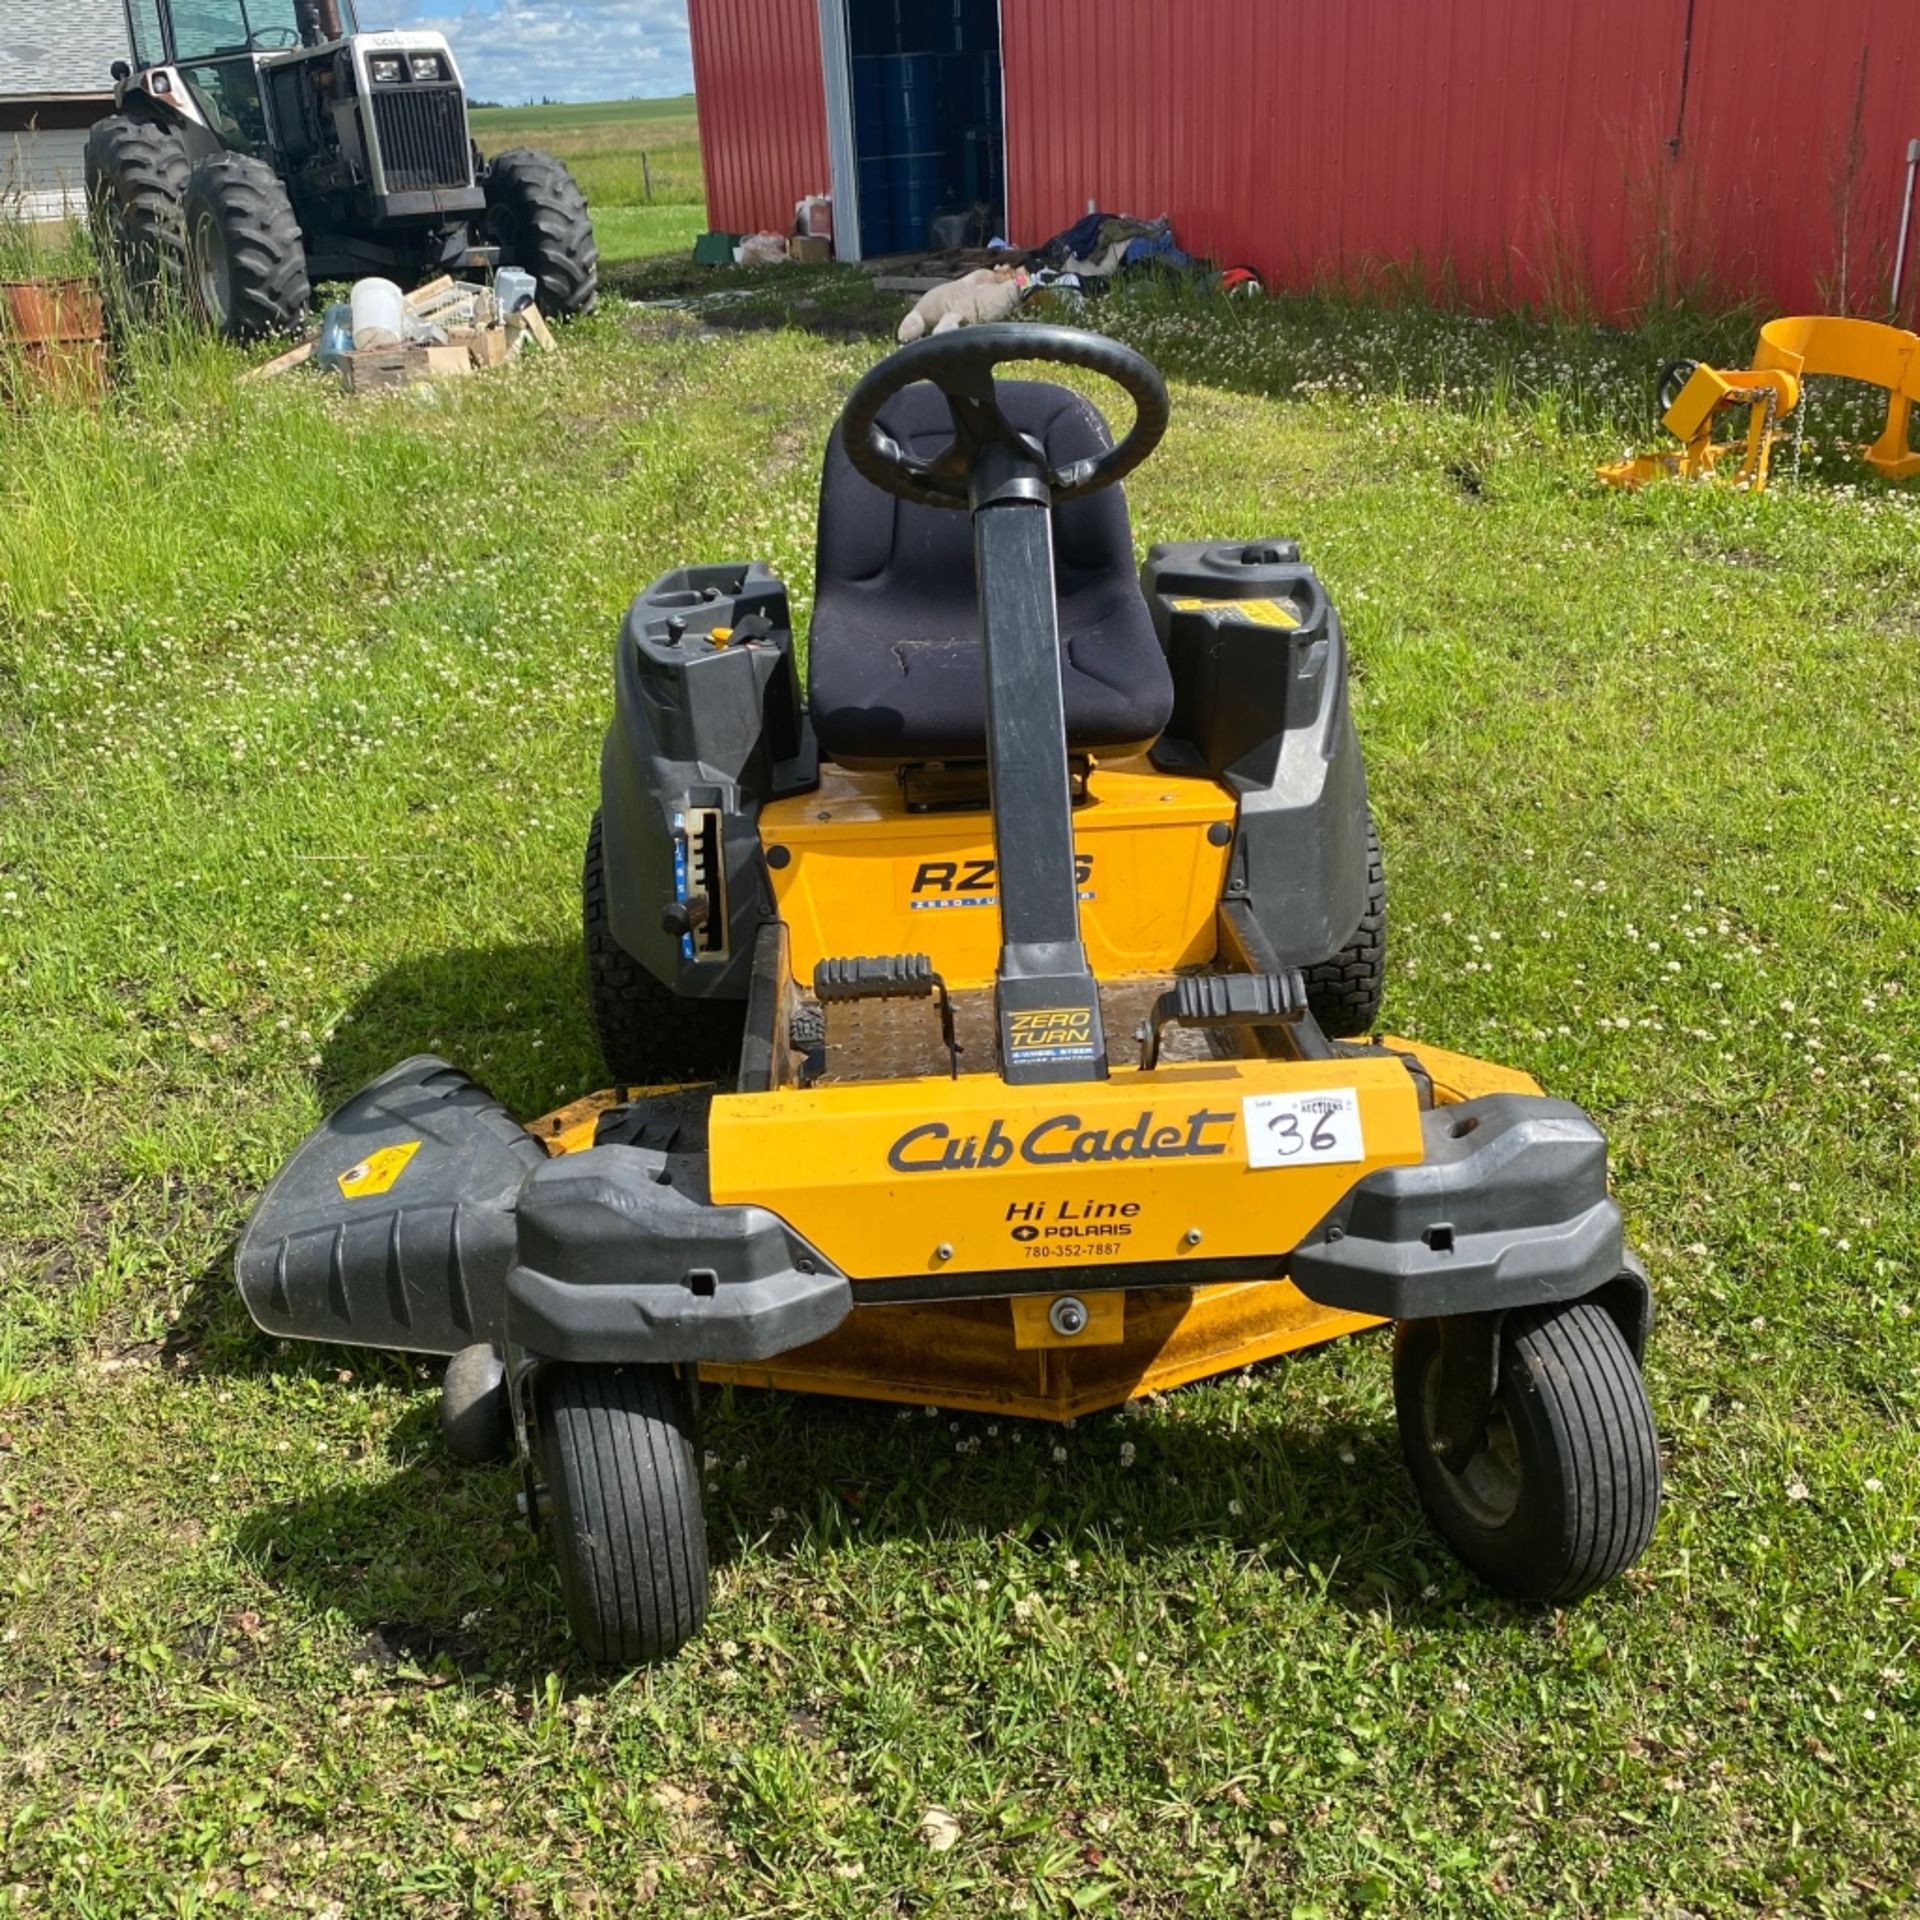 2017 Cub Cadet Lawn Mower, 54 in. deck - Image 2 of 4